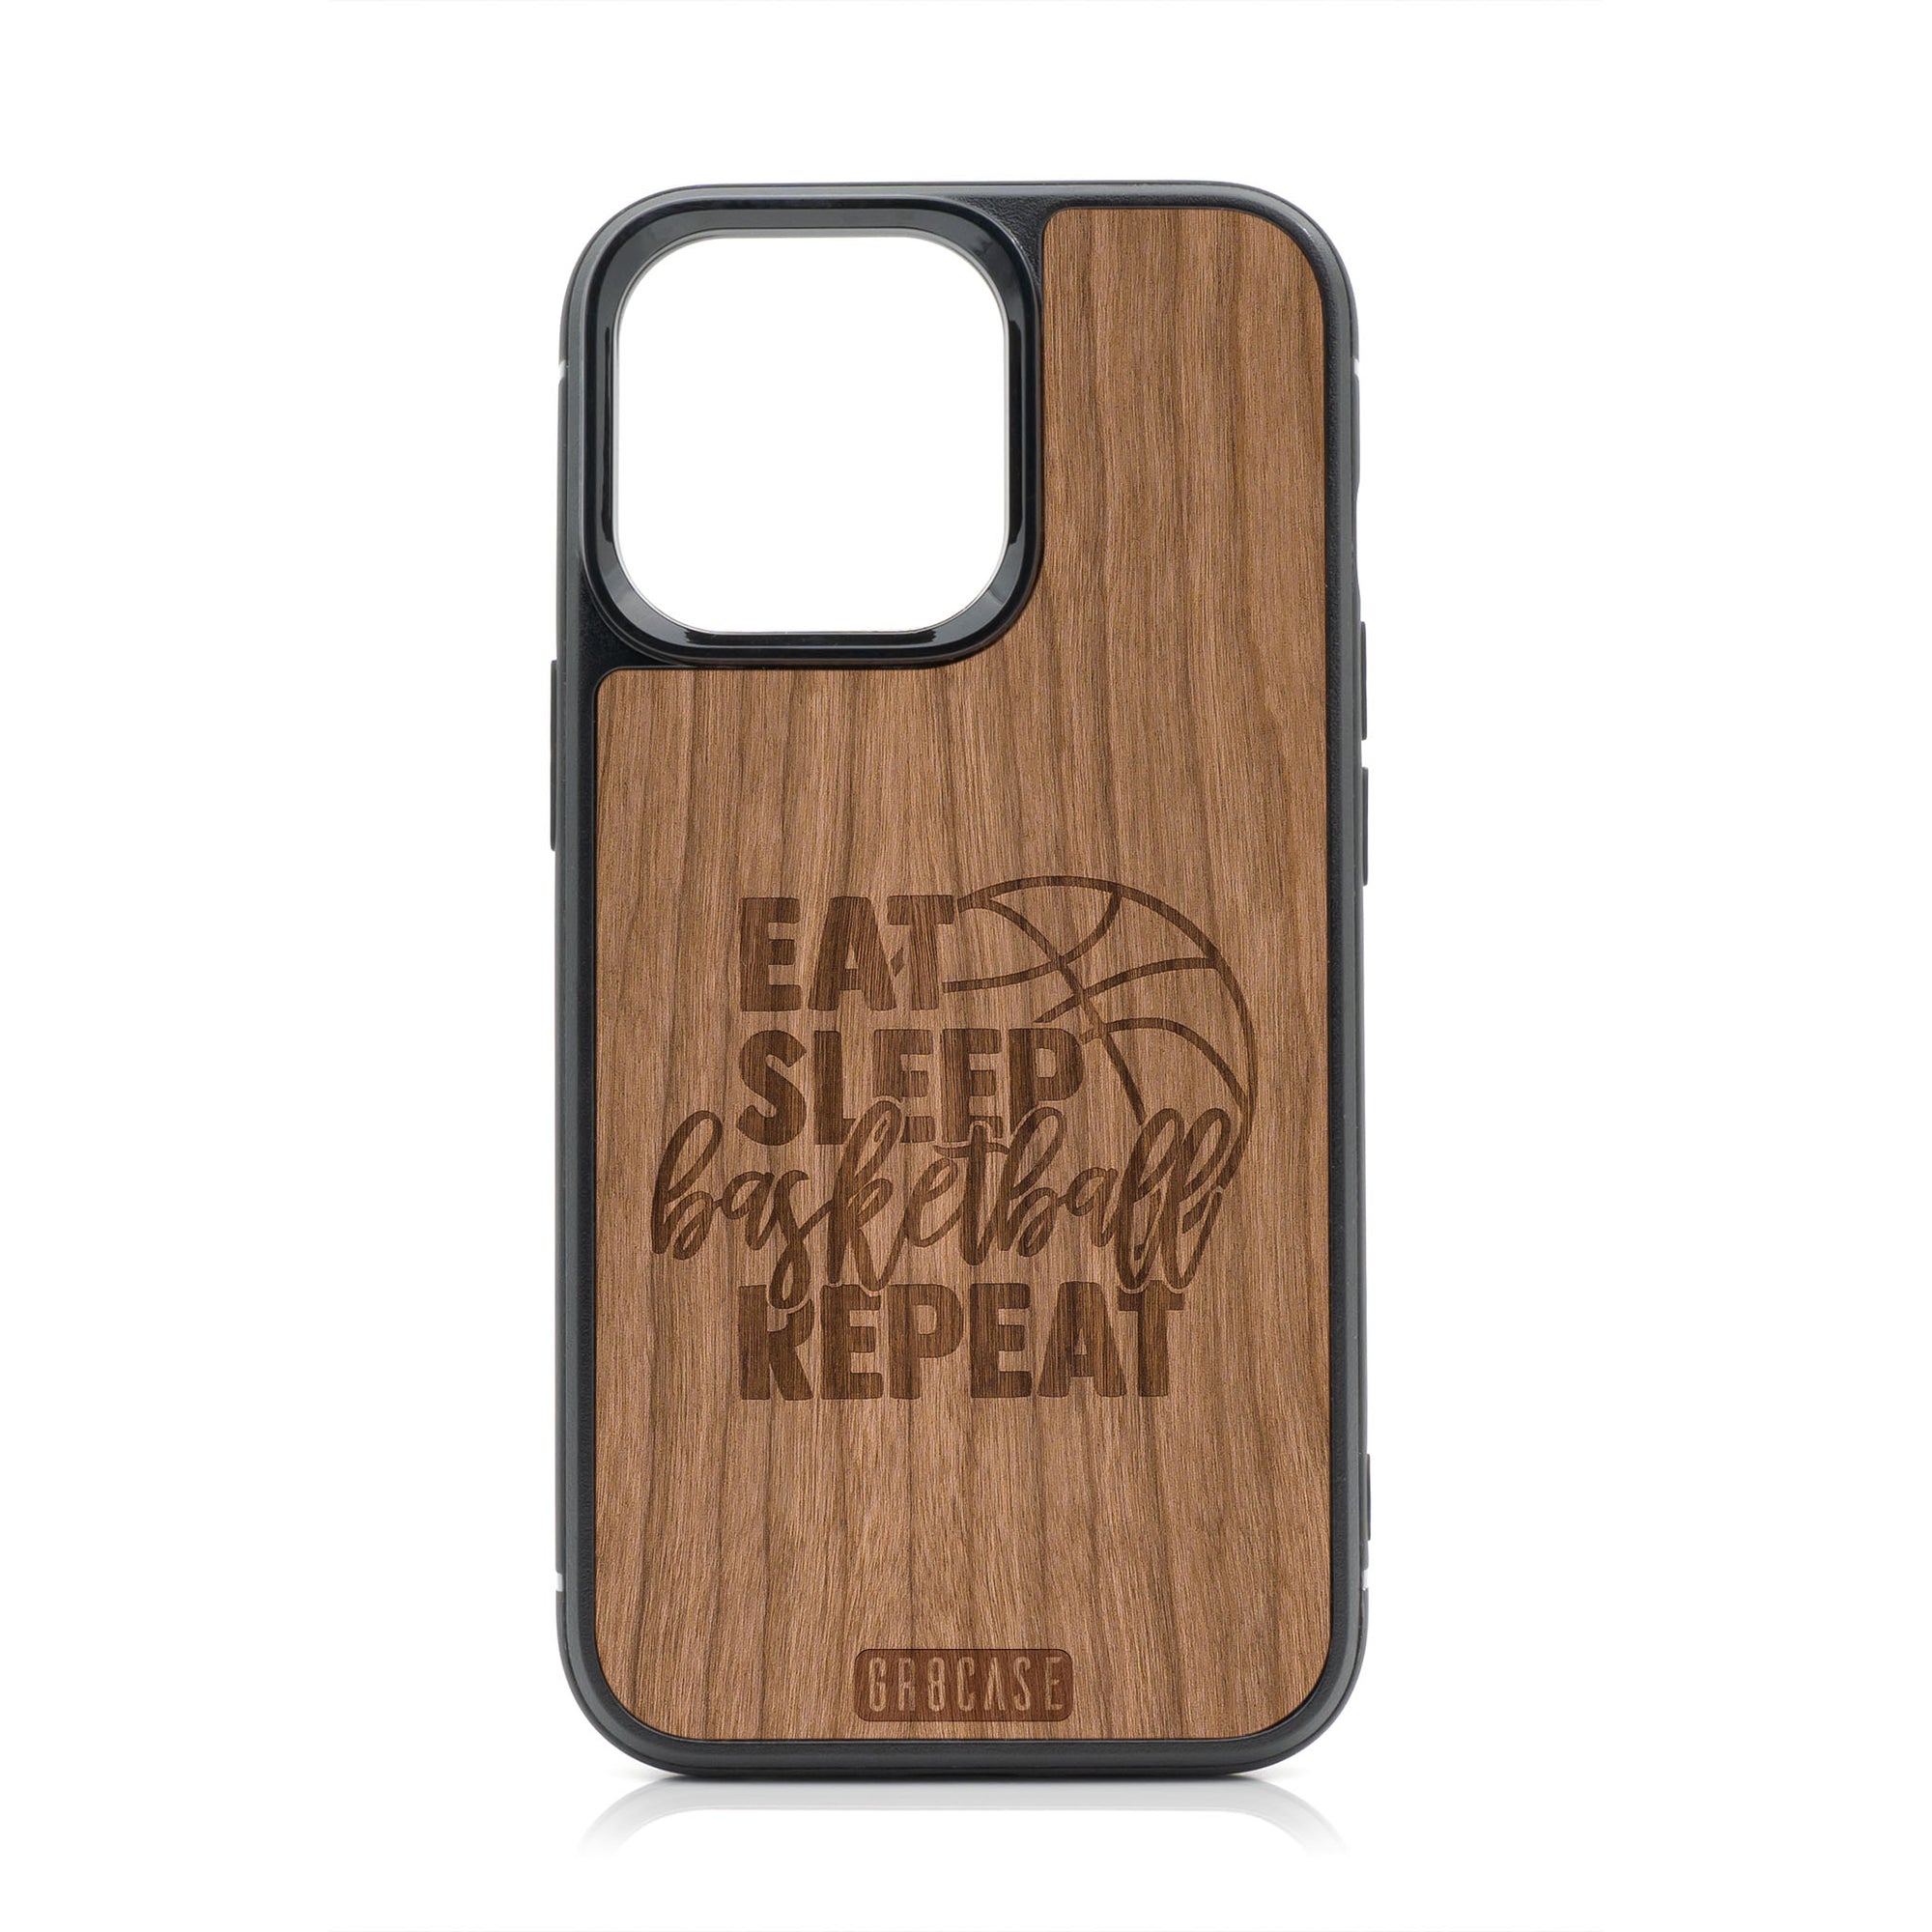 Eat Sleep Basketball Repeat Design Wood Case For iPhone 13 Pro